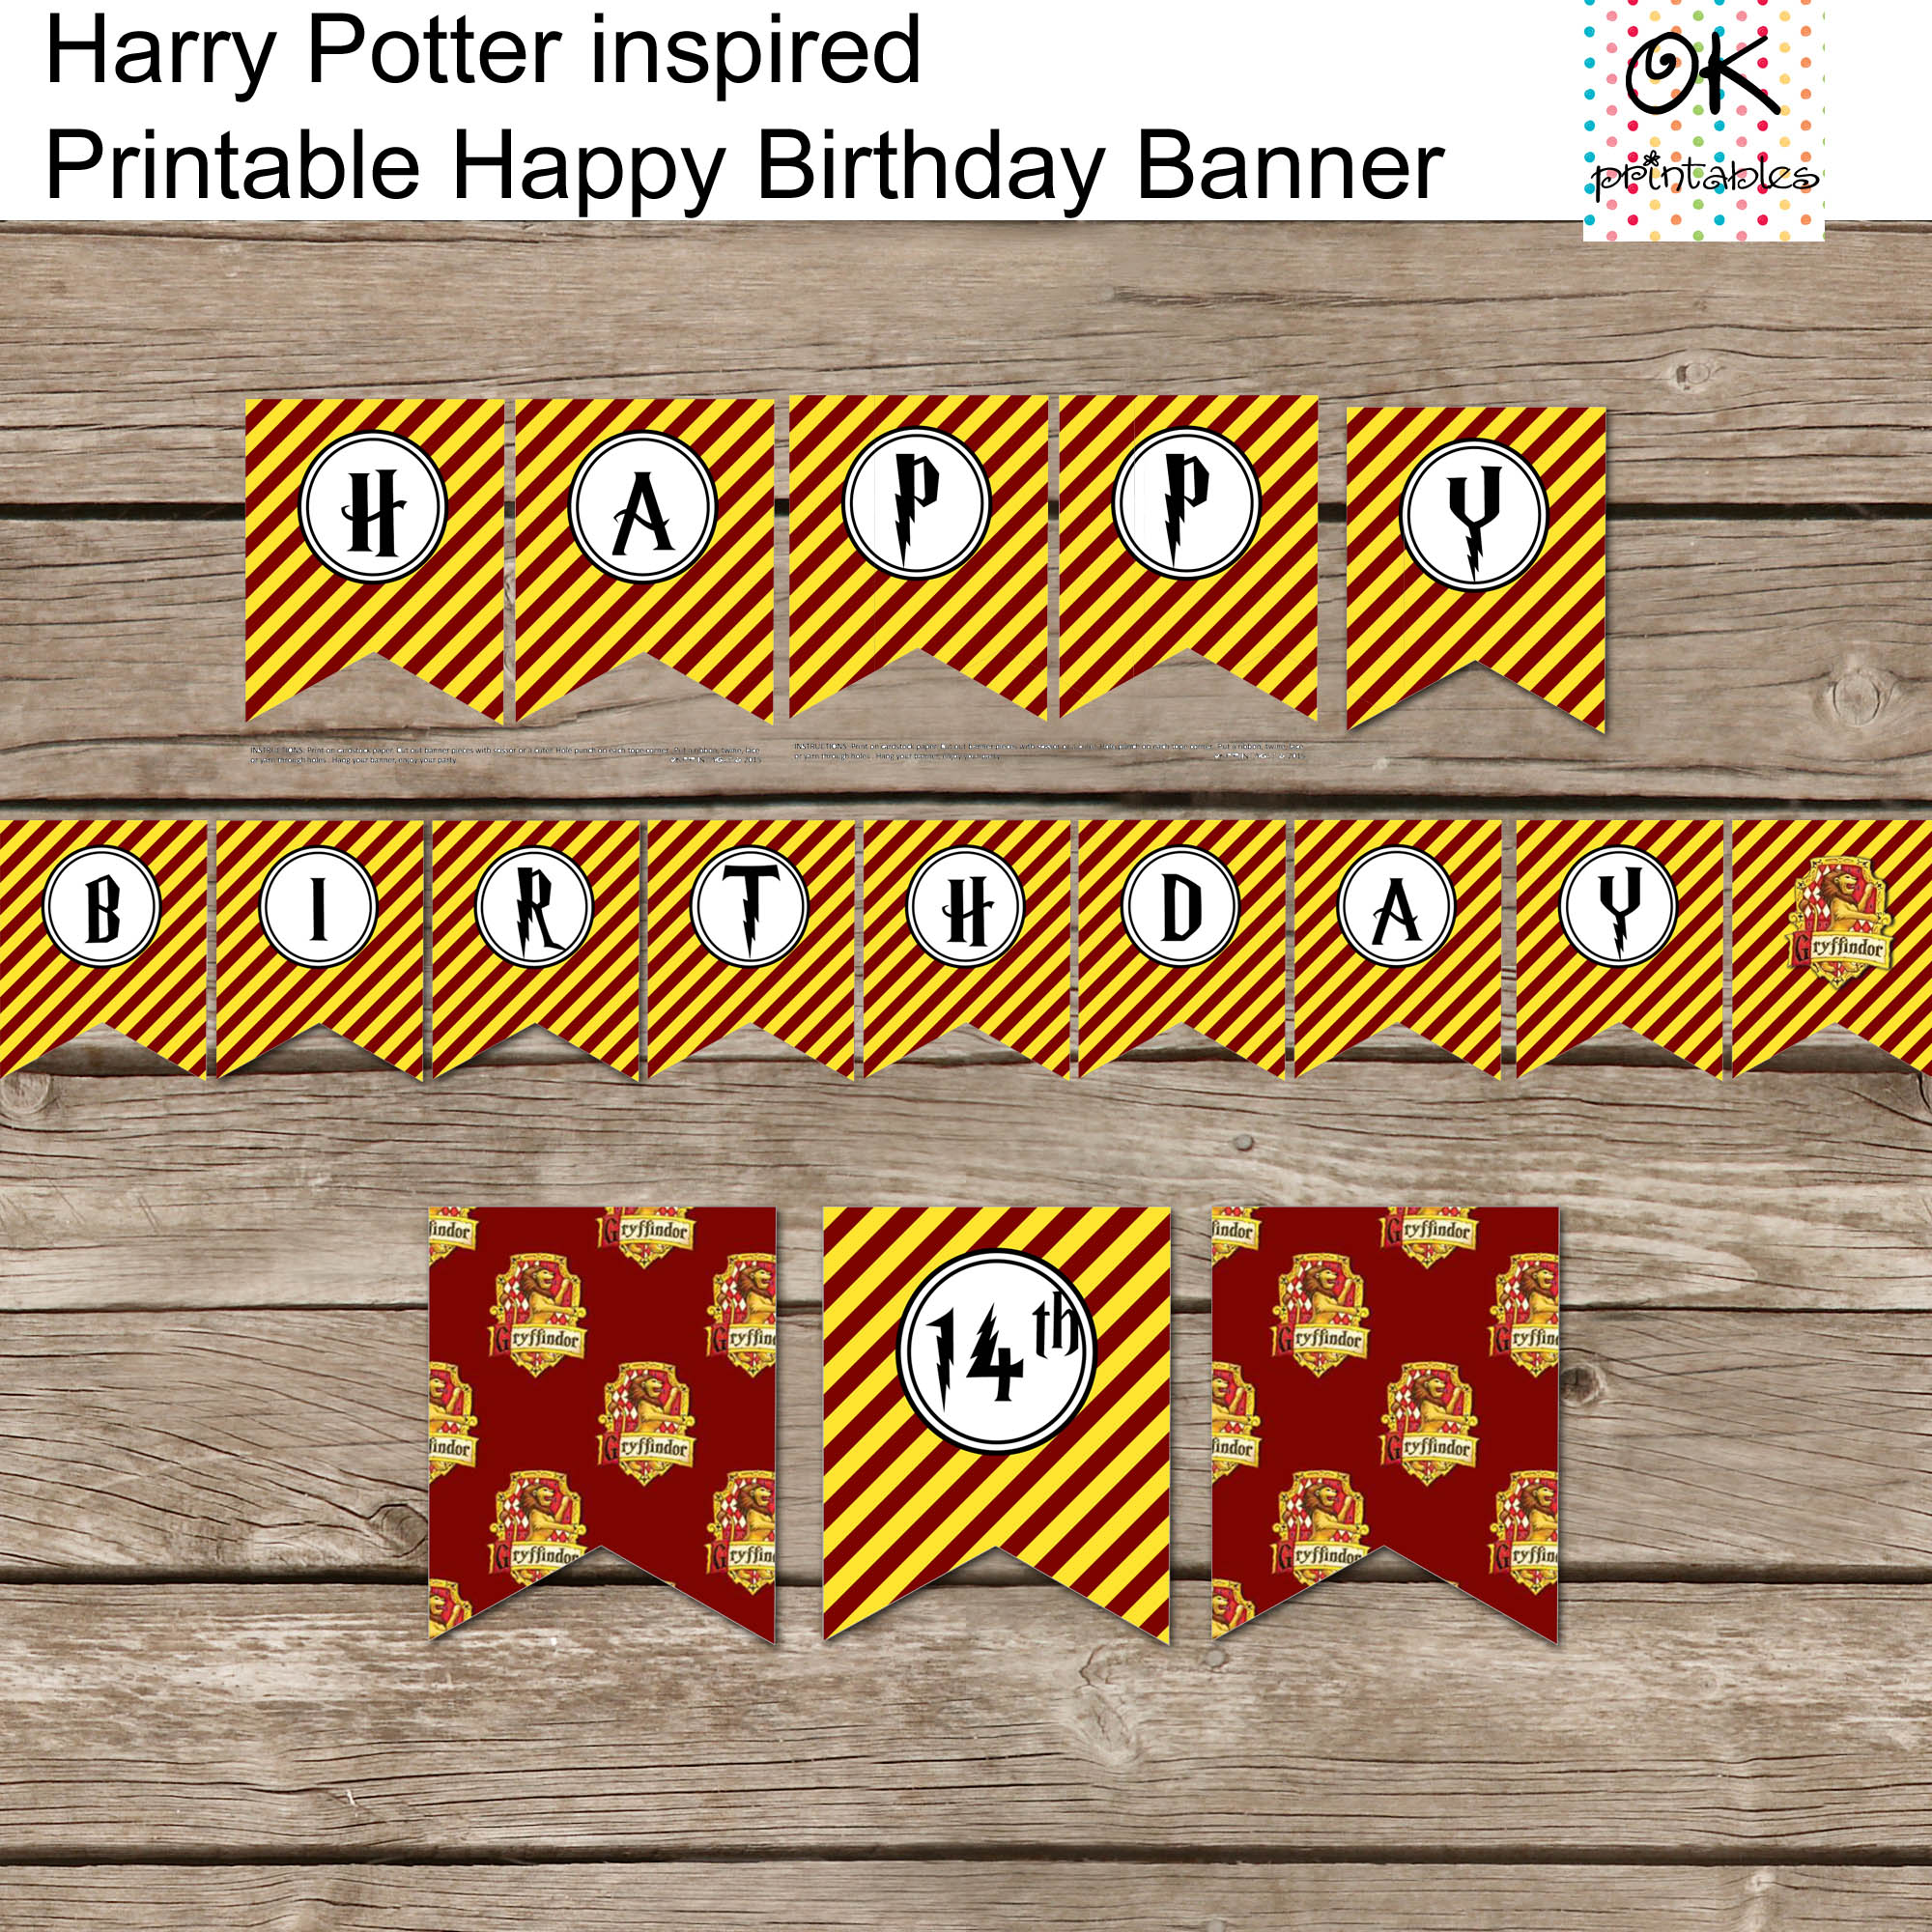 Harry Potter Inspired Happy Birthday Banner / Diy Harry Potter Style Party  Banner Printable /